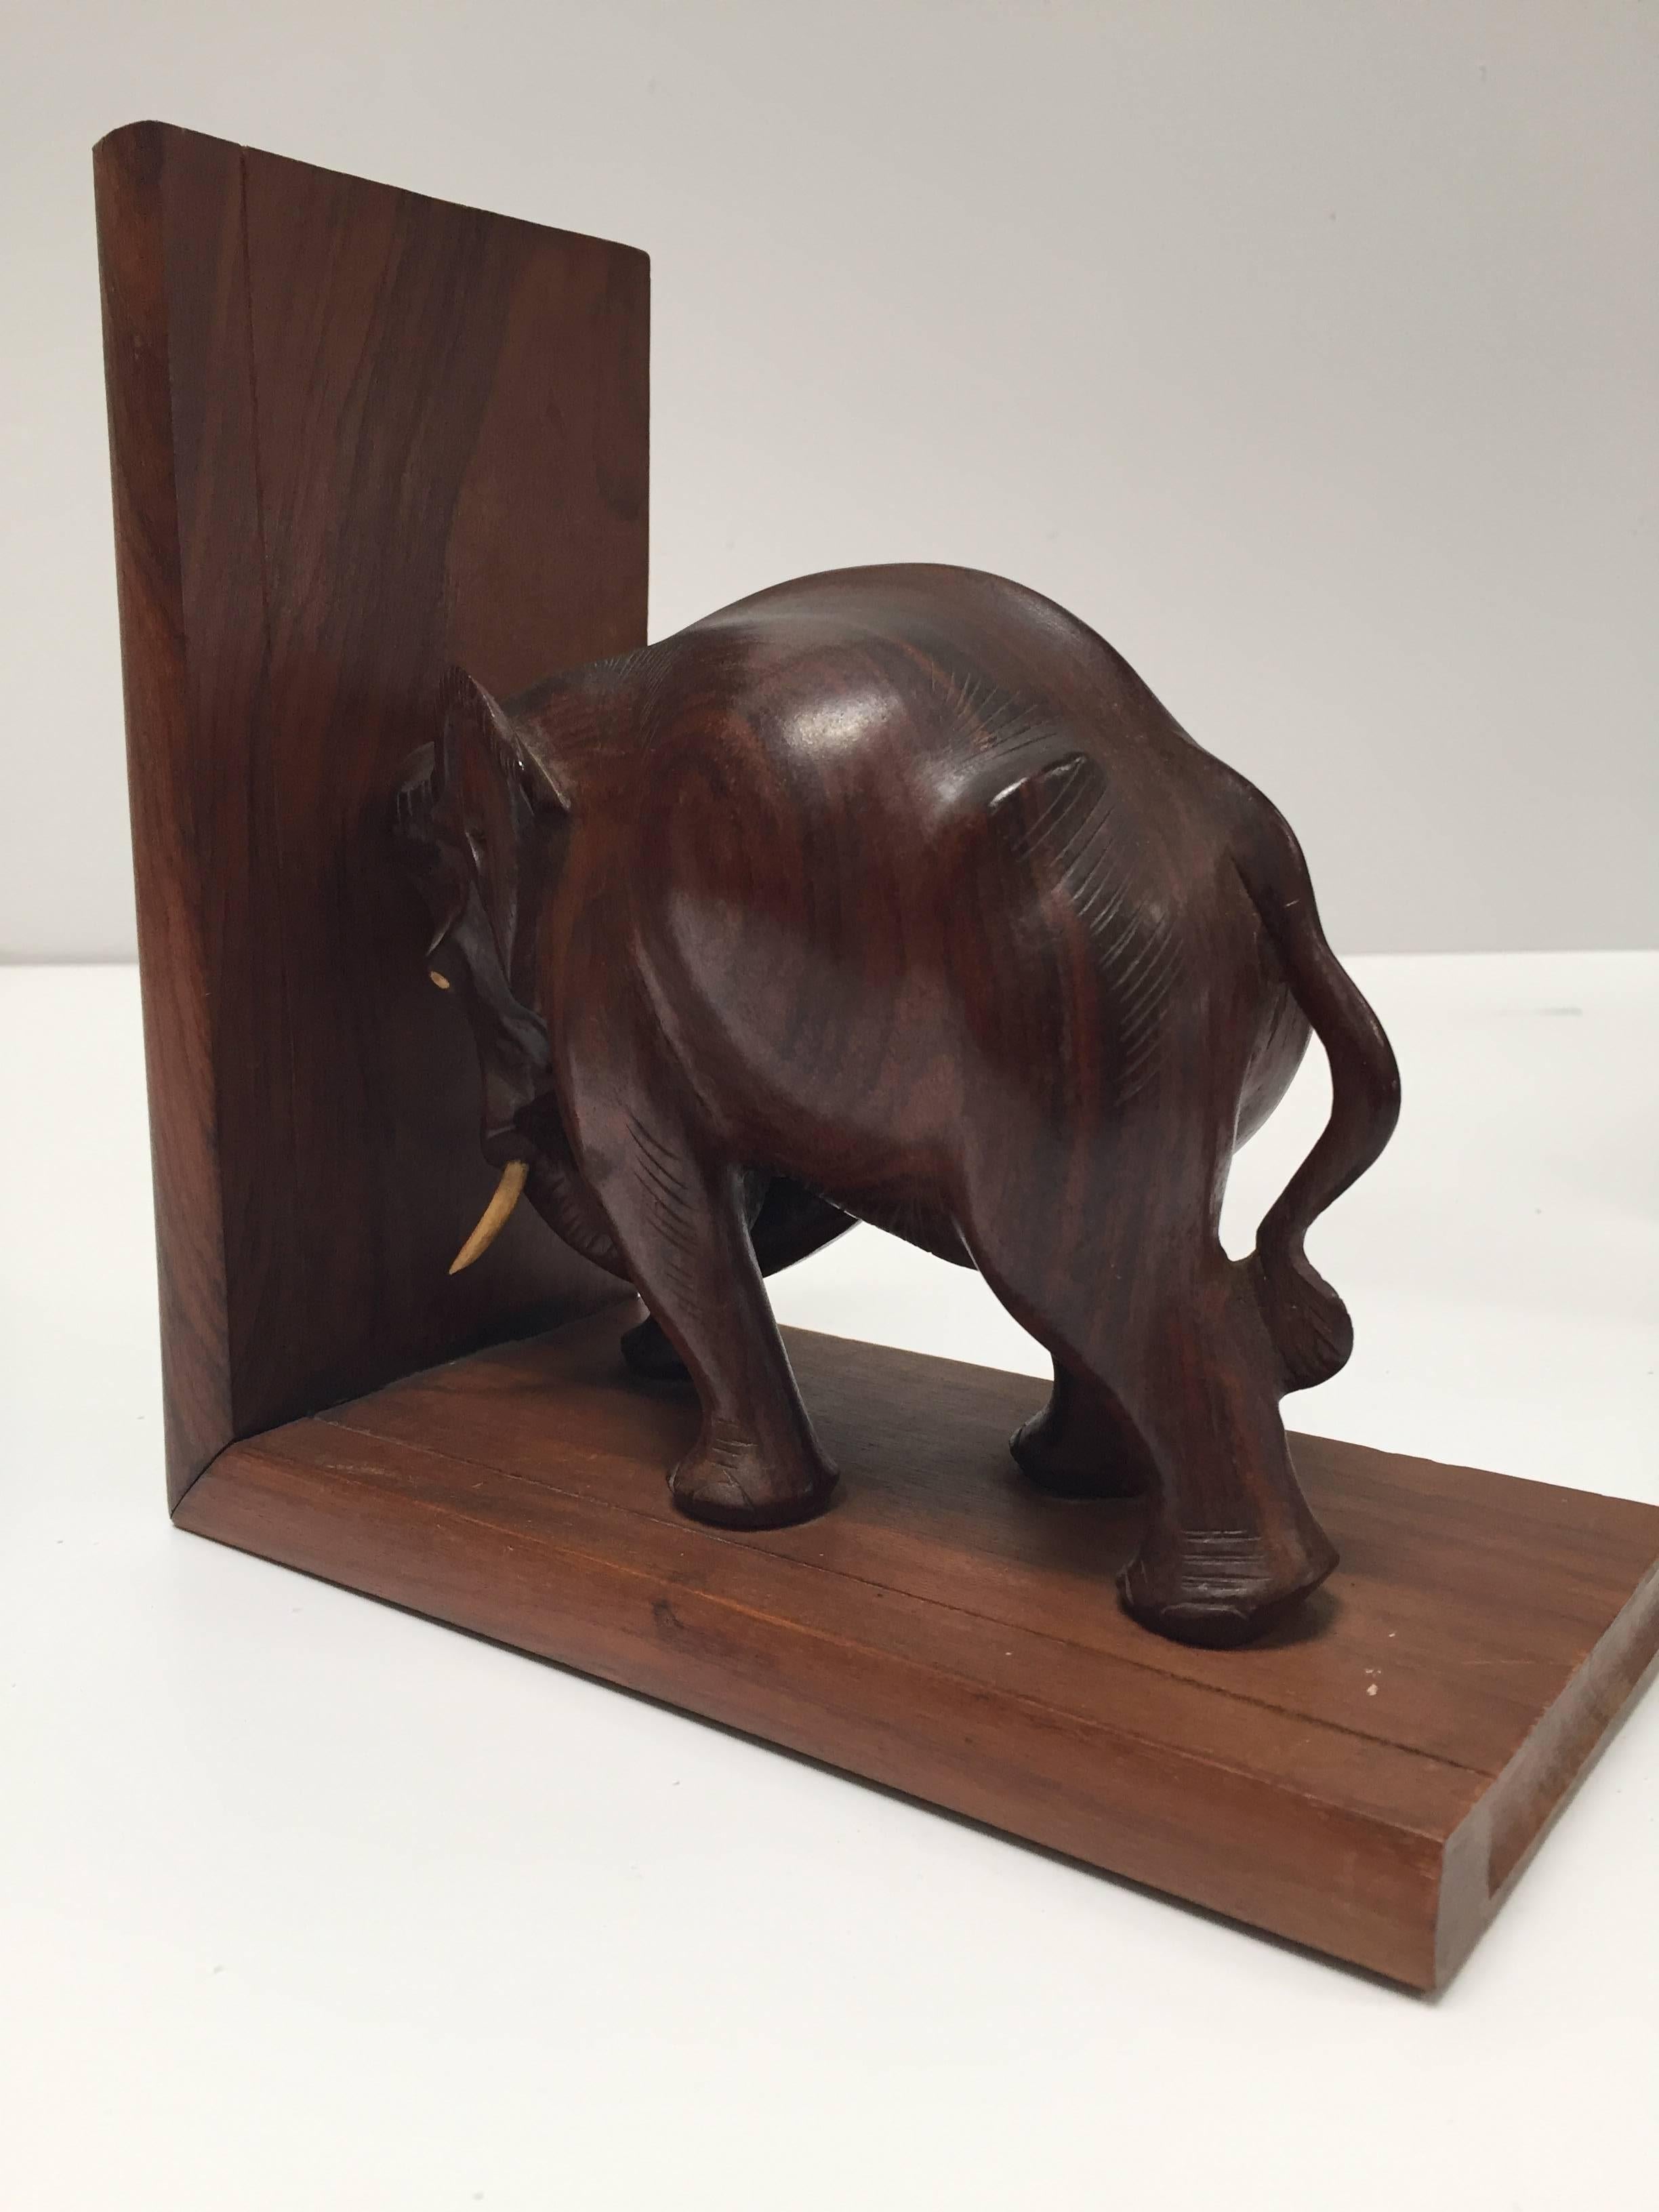 Anglo Raj Hand-Carved Wooden Elephant Bookends, circa 1950